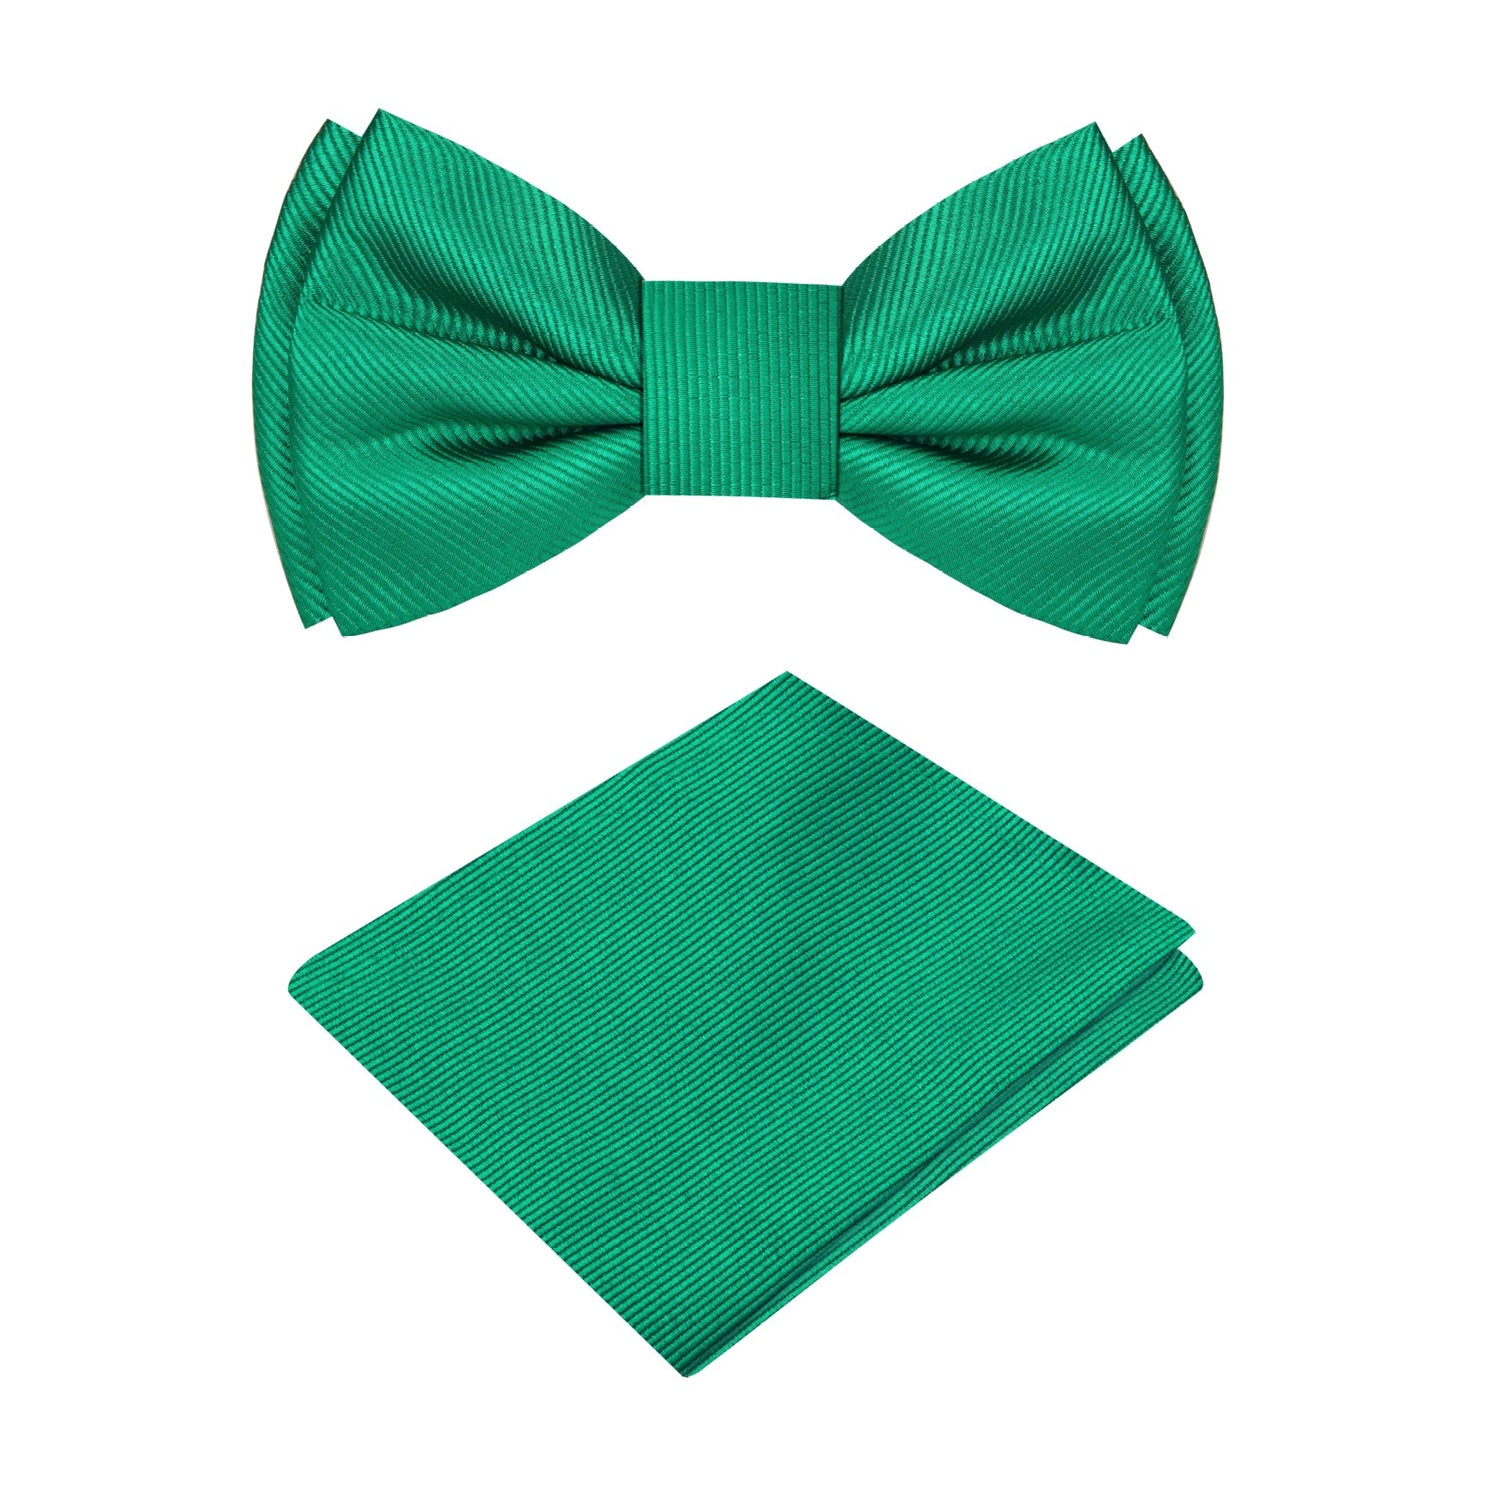 A Green Solid Pattern Silk Self Tie Bow Tie, Matching Pocket Square